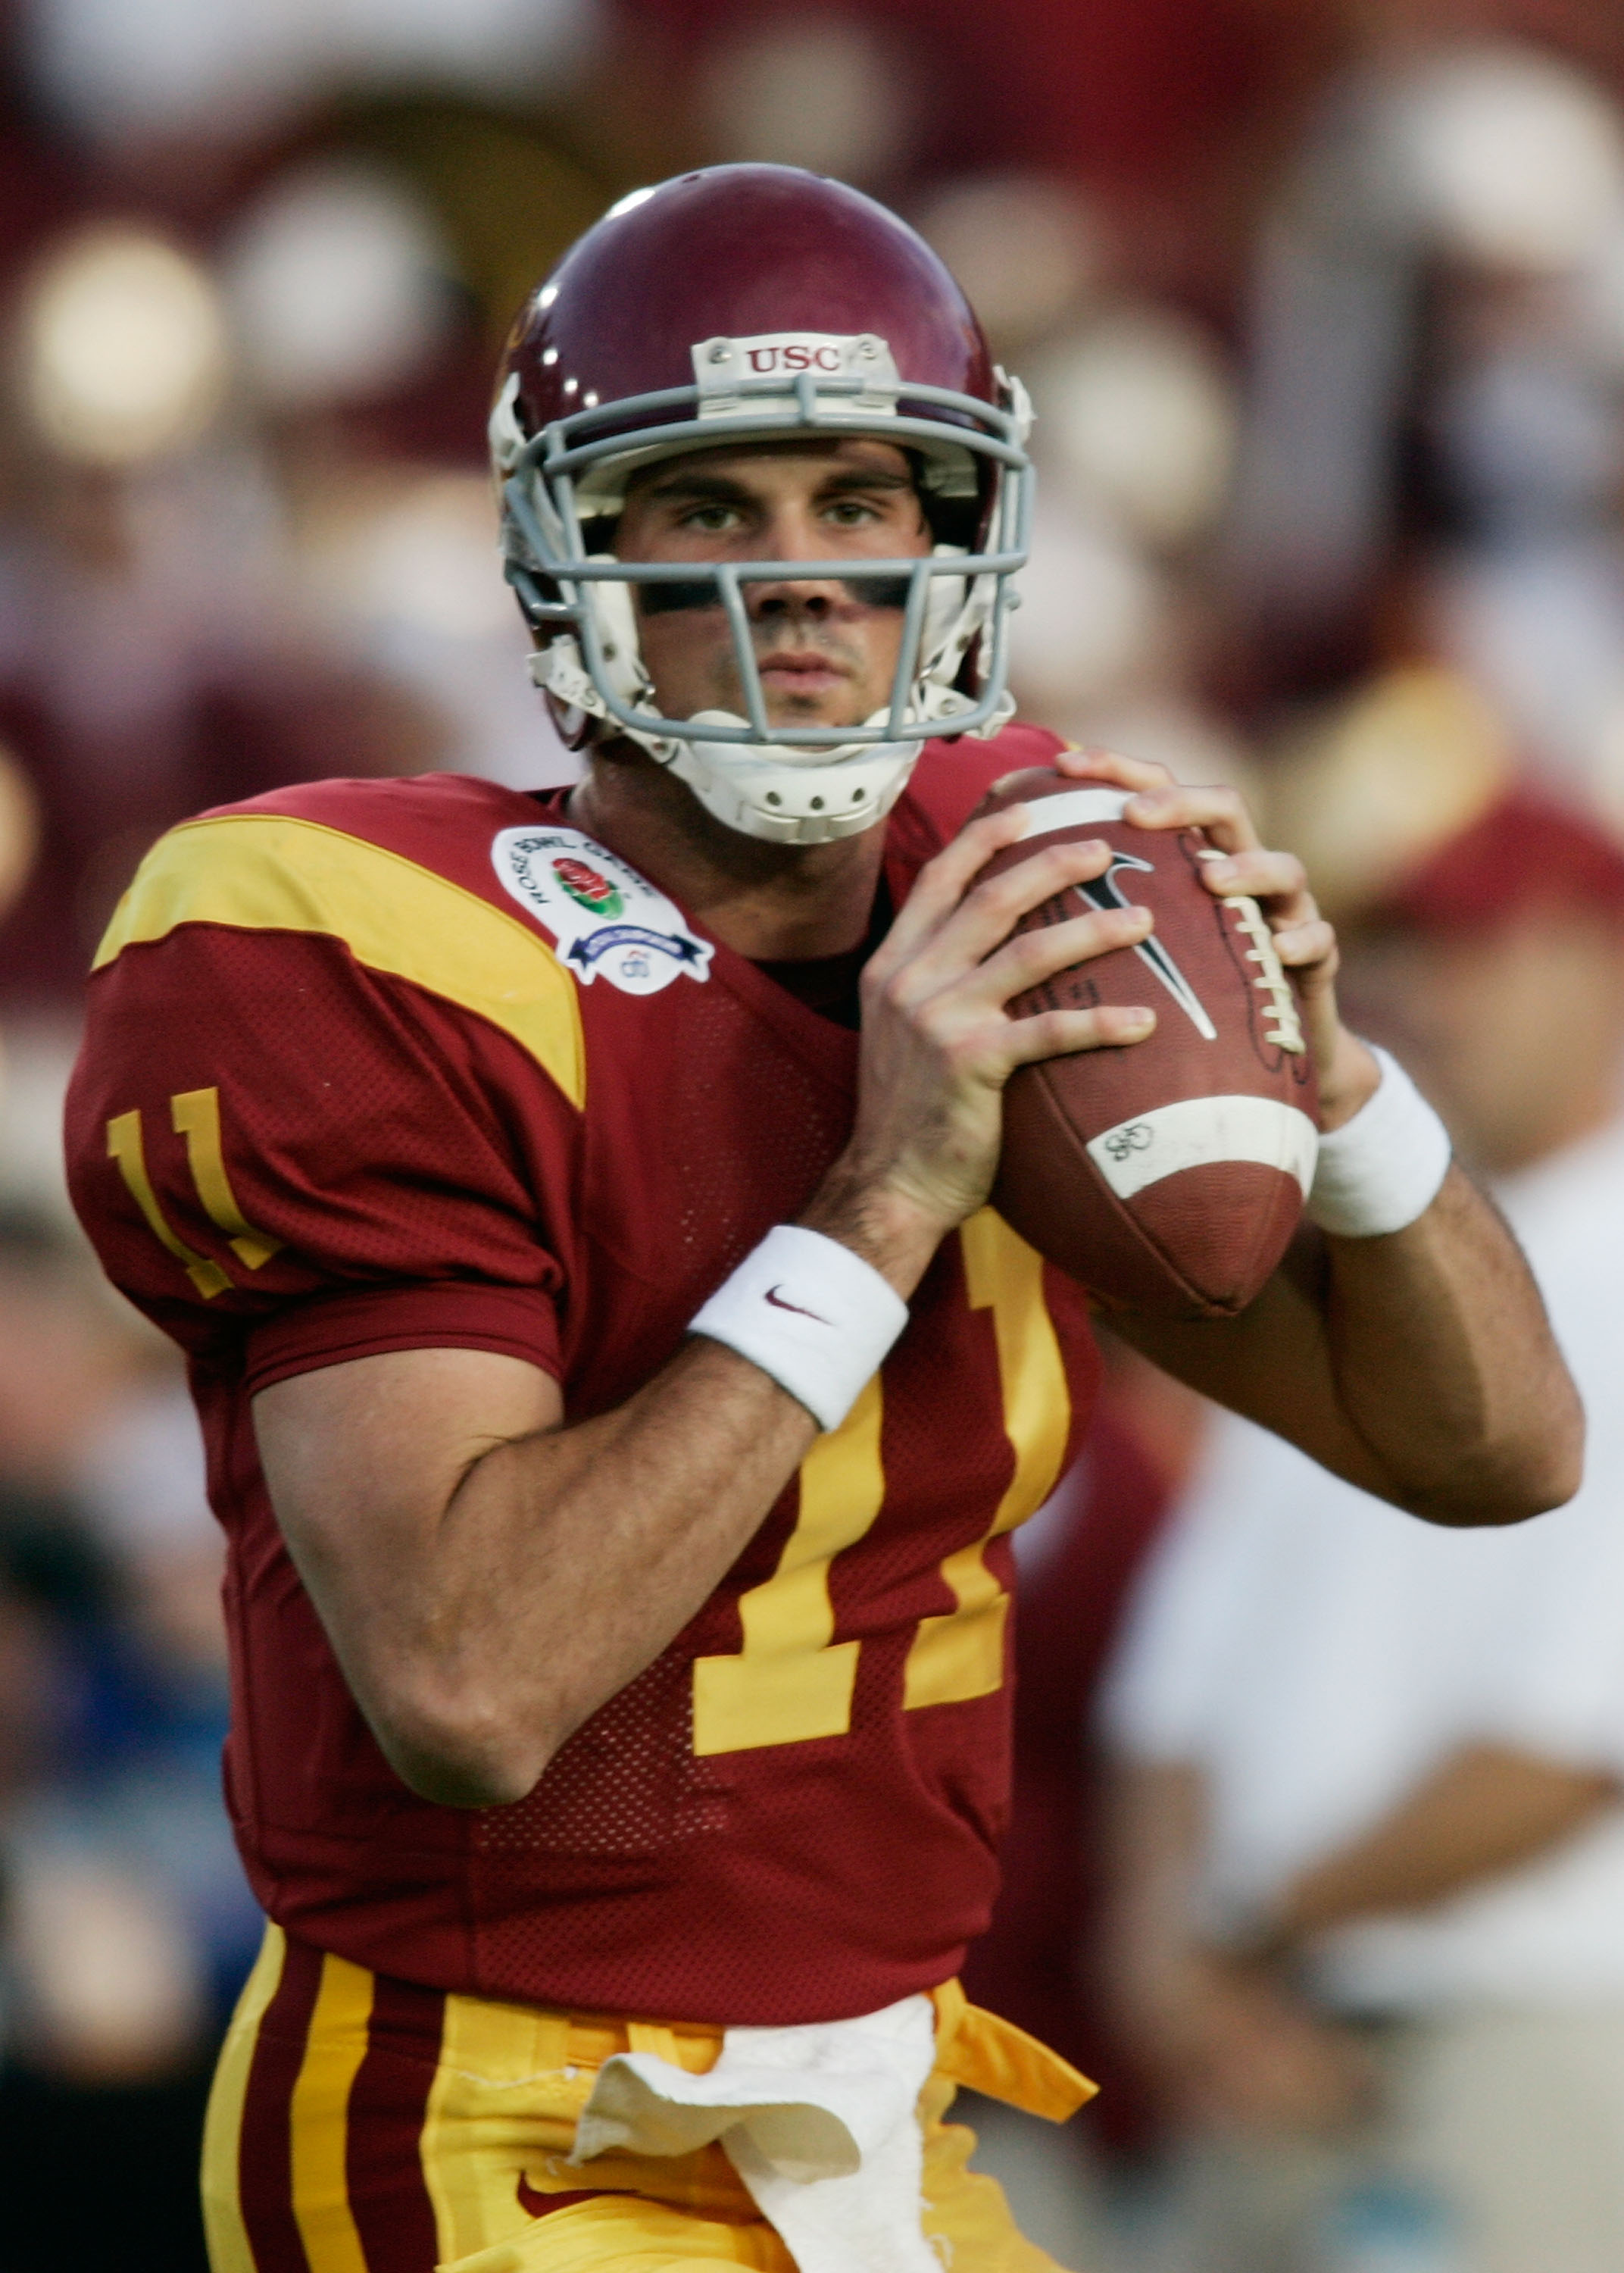 PASADENA, CA - JANUARY 04:  Quarterback Matt Leinart #11 of the USC Trojans warms-up before the start of the BCS National Championship Rose Bowl Game against the Texas Longhorns on January 4, 2006 in Pasadena, California.  (Photo by Donald Miralle/Getty I